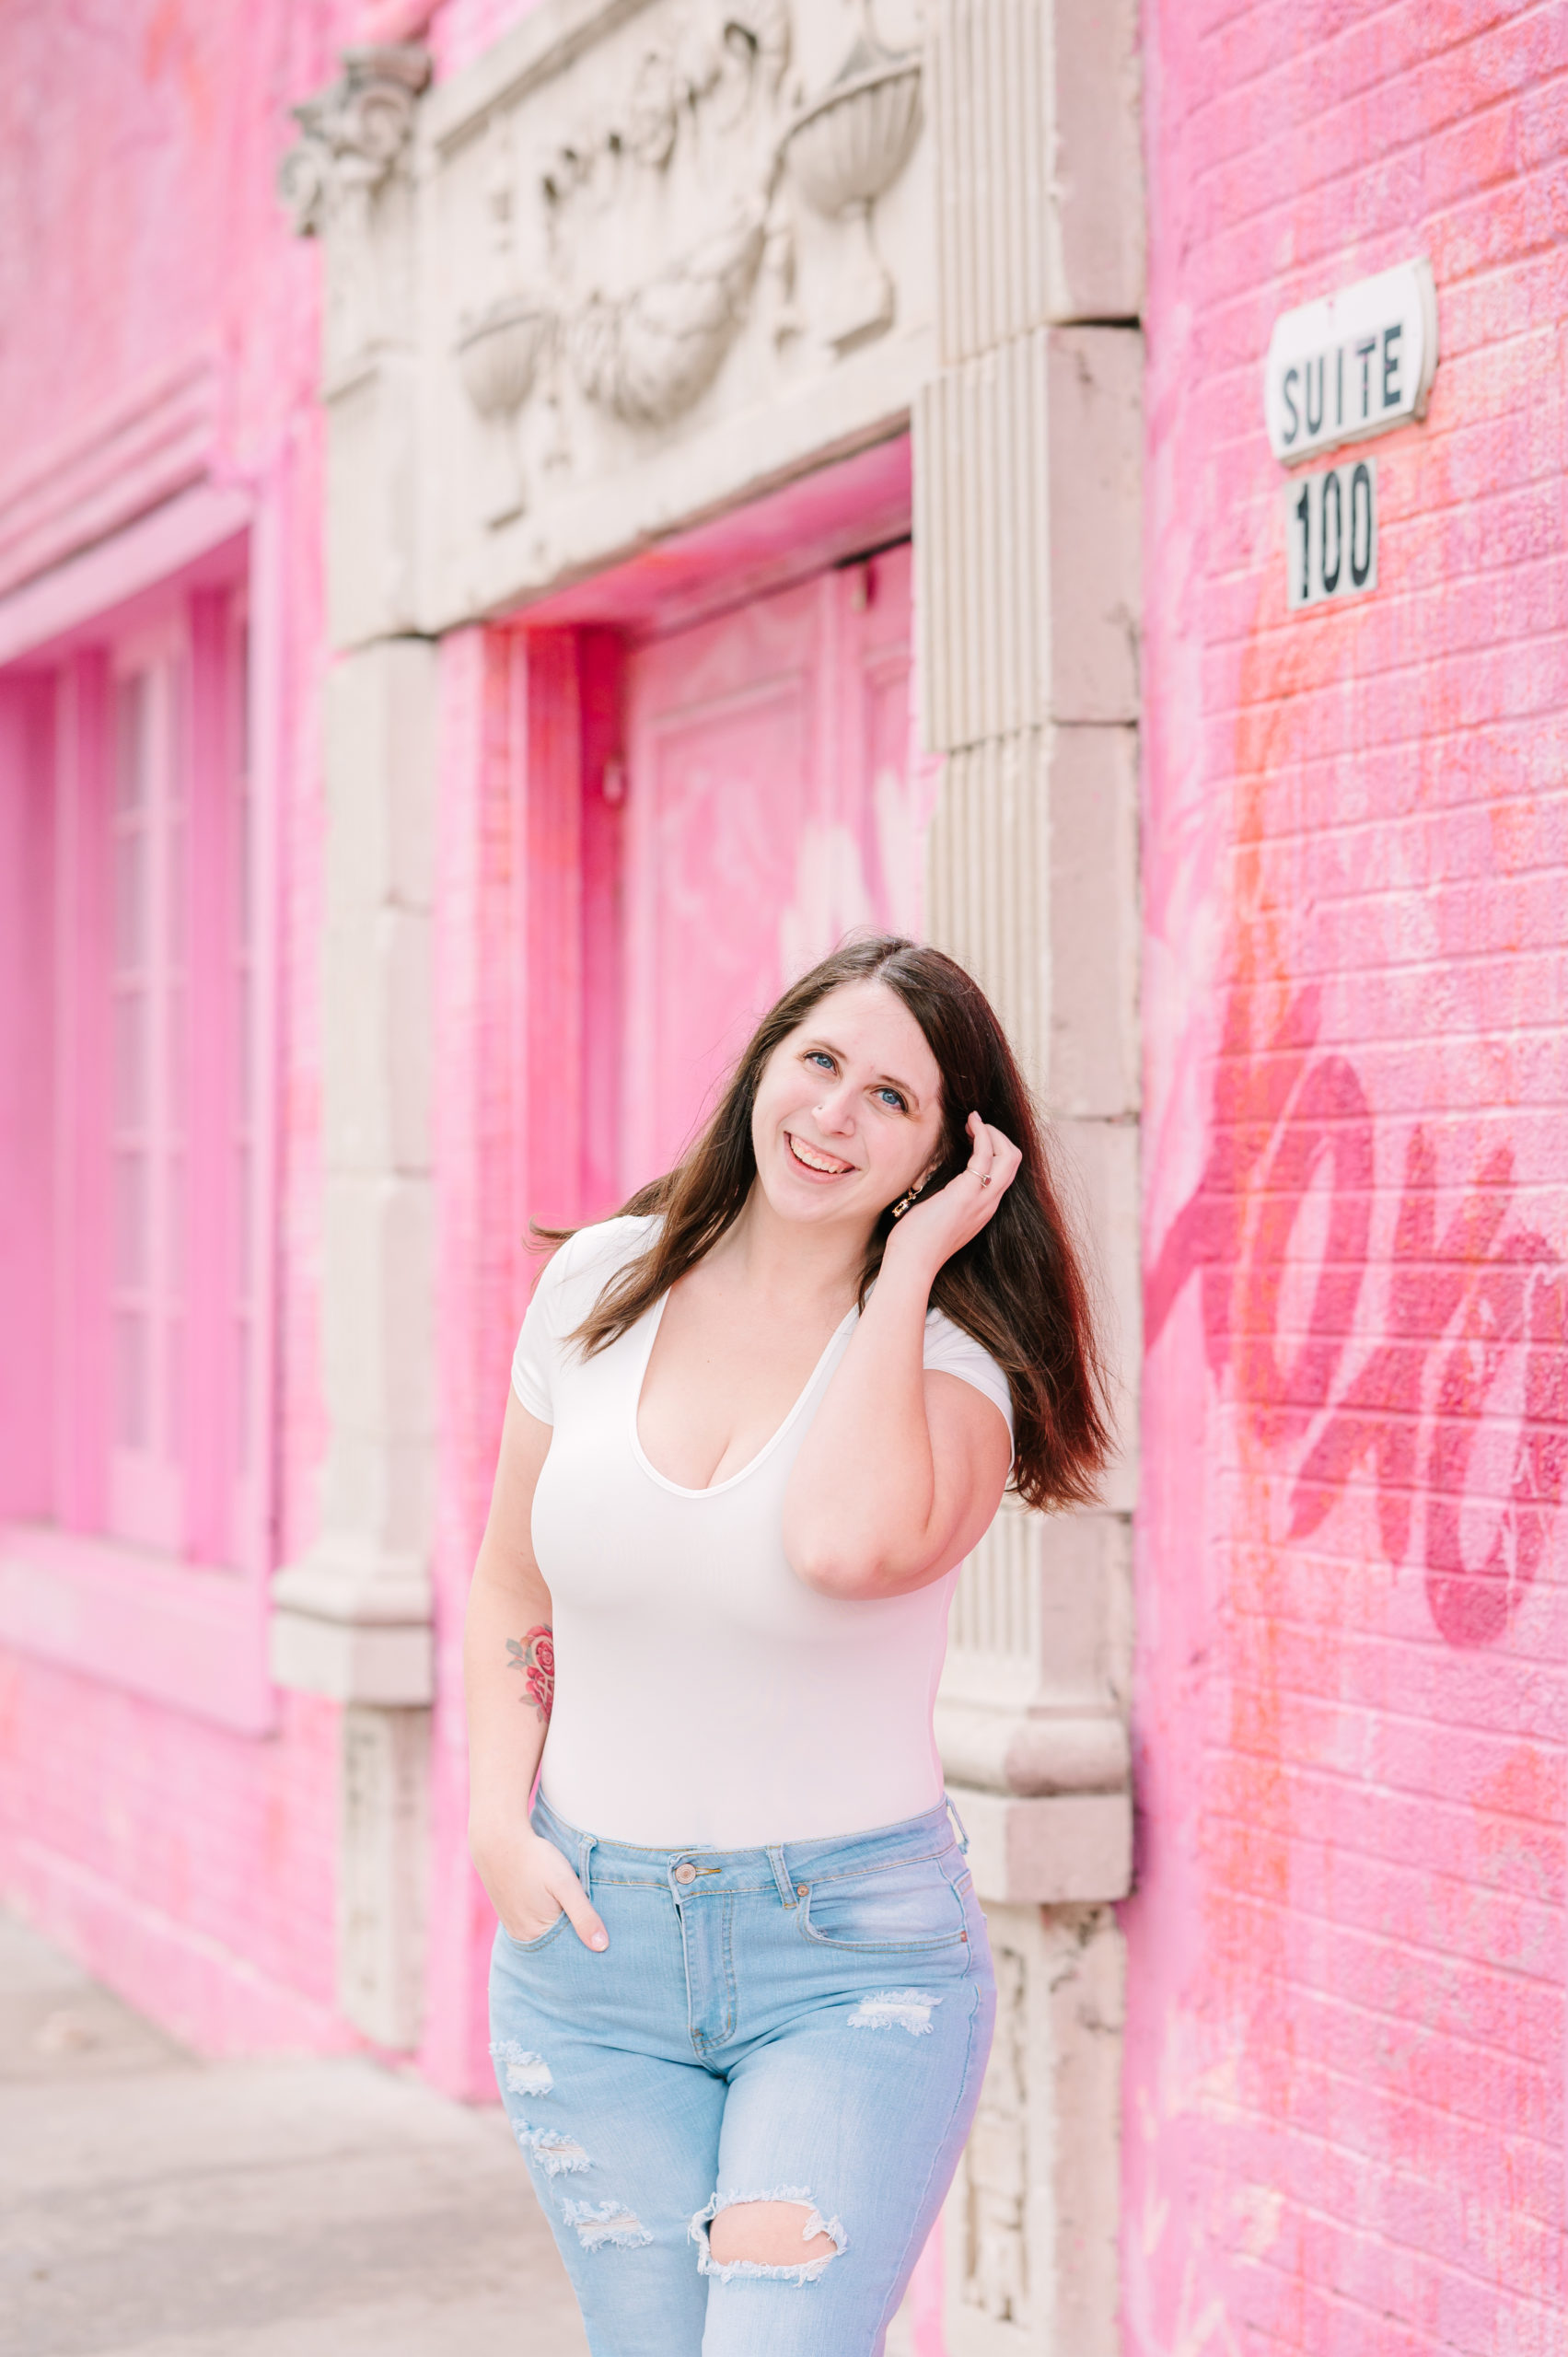 Cait Potter standing in front of a pink wall.